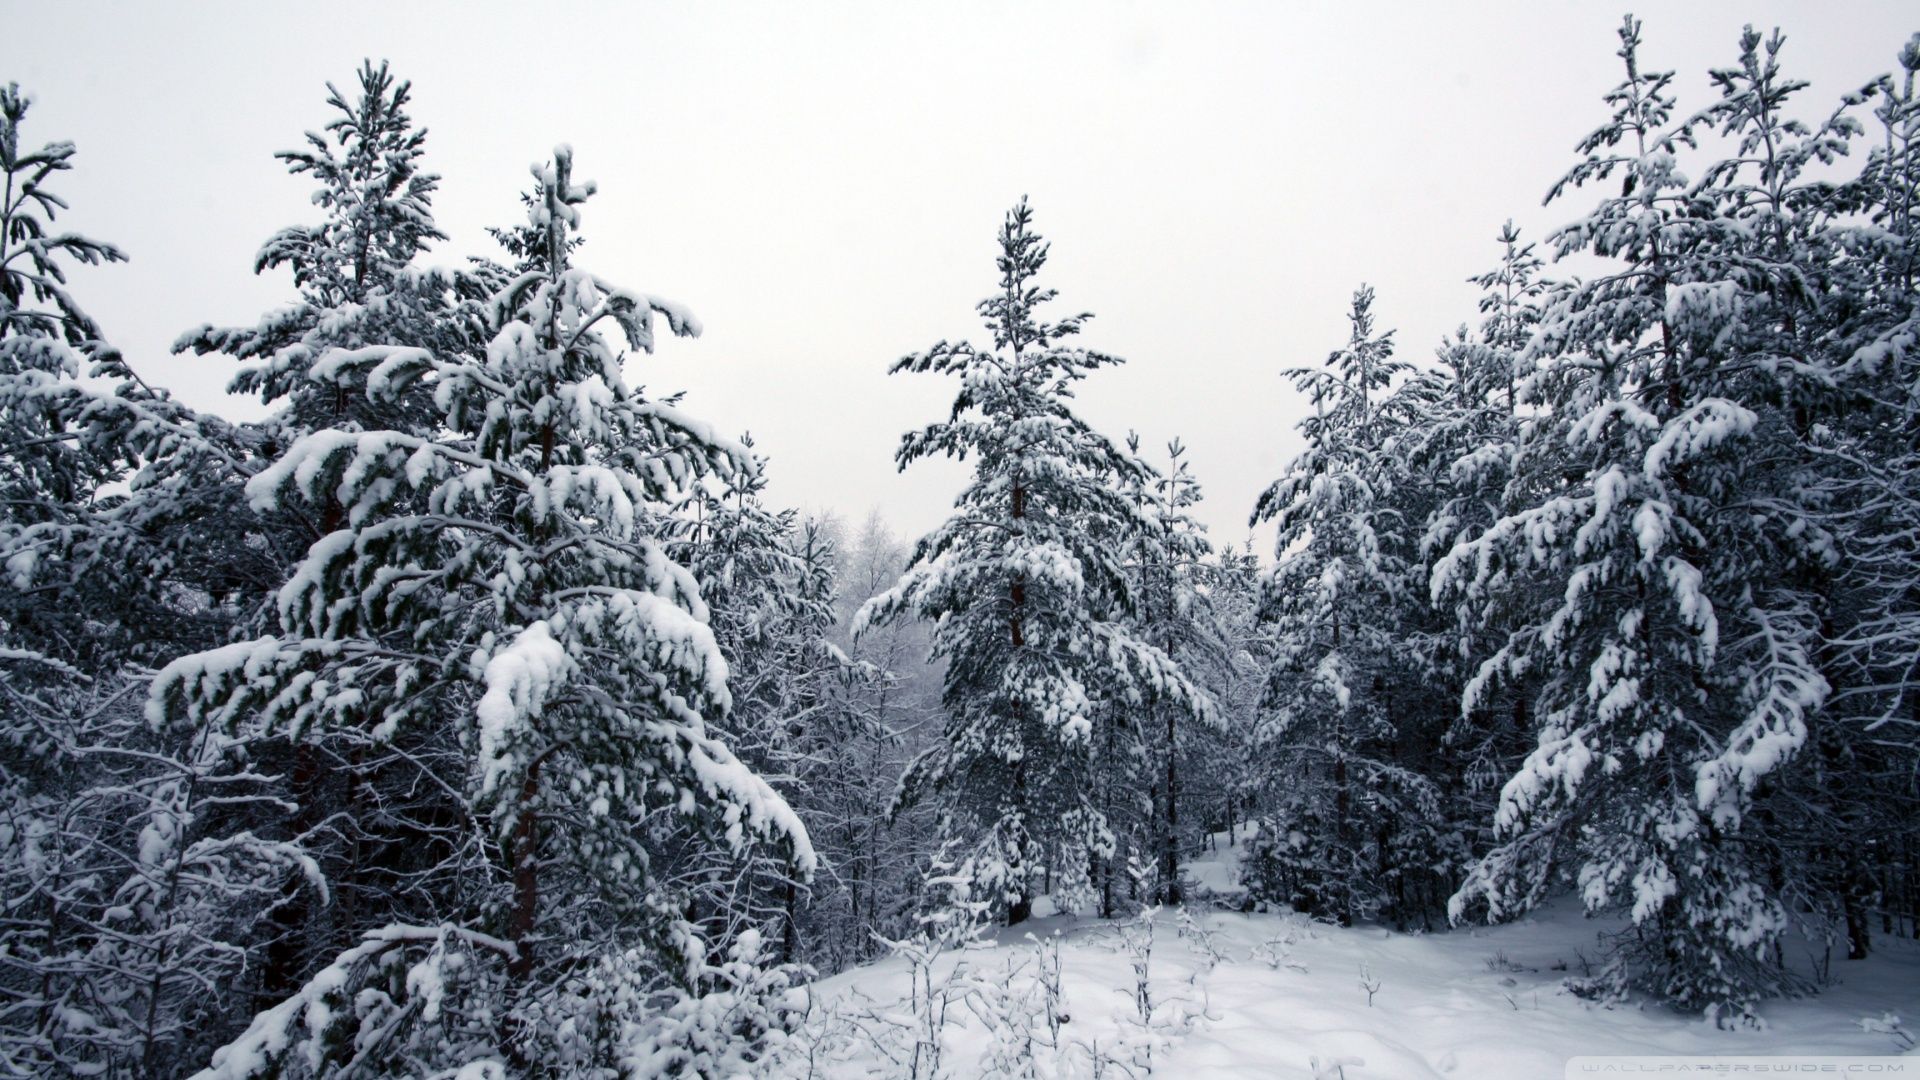 trees in snow images - Google Search | Lovely christmas glitteriness ...